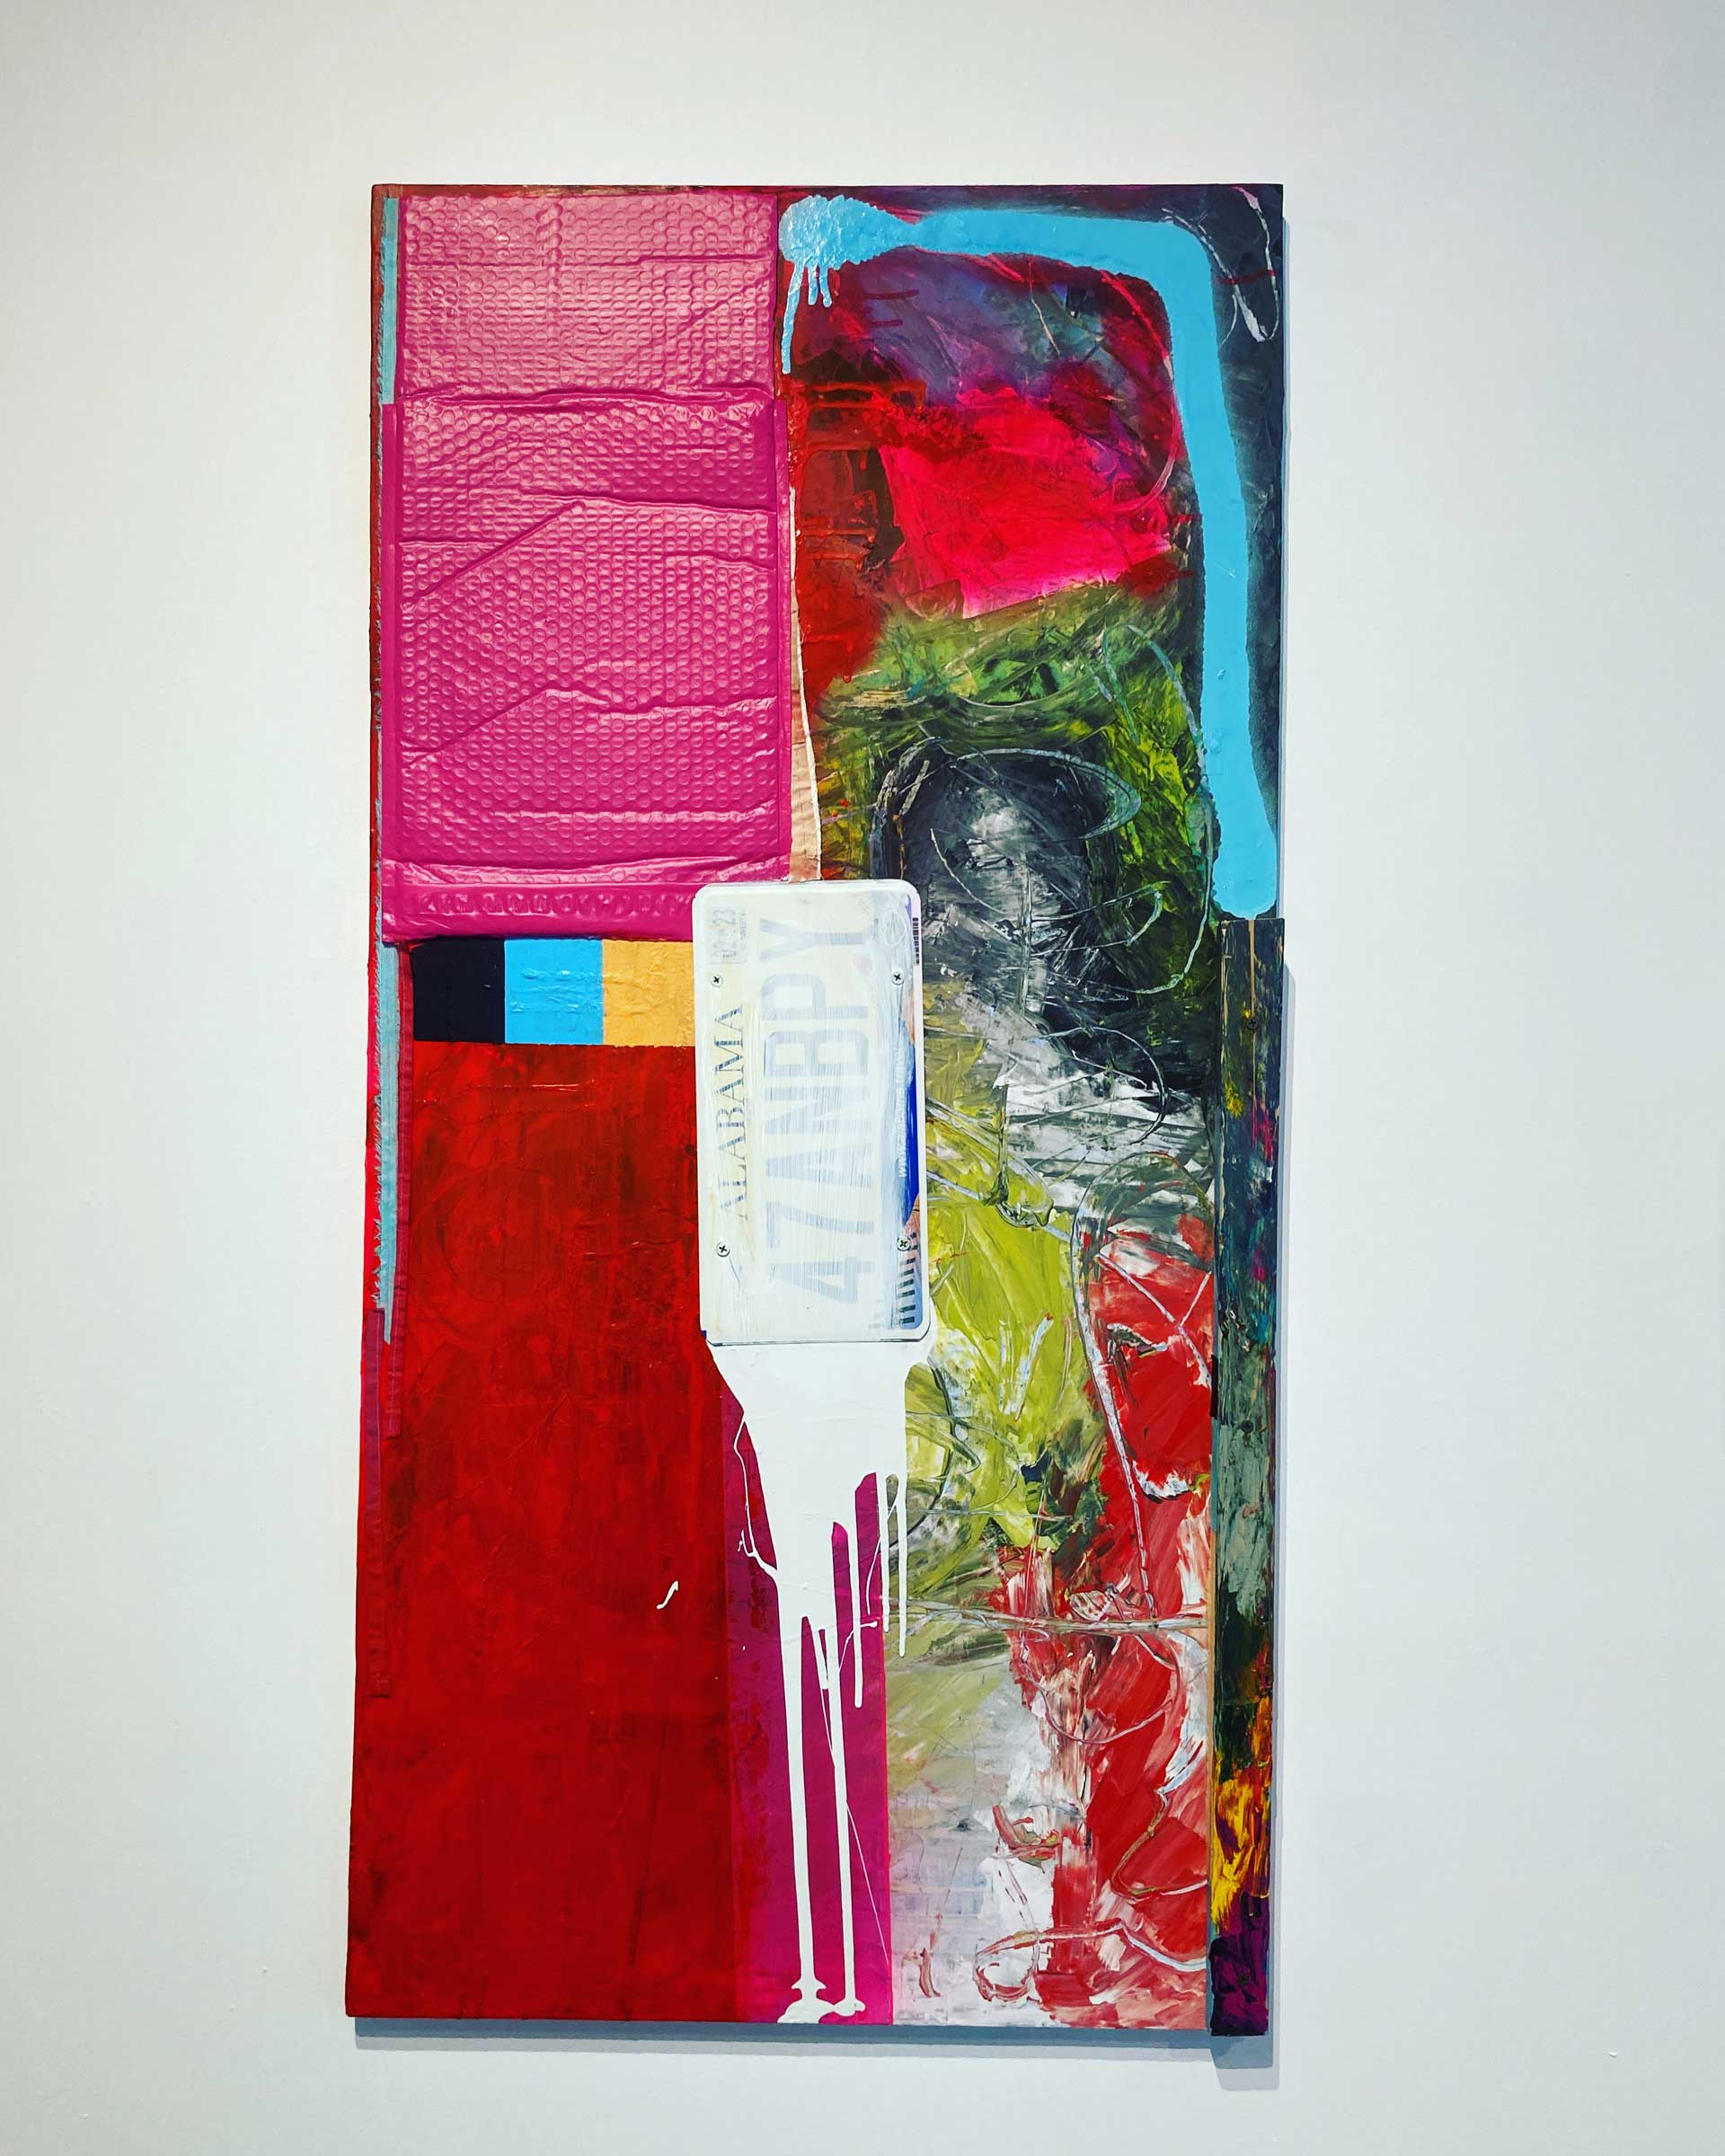 Permission, mixed media painting and assemblage by Elizabeth Rennie and Heather Baumbach. Submerge Bells Gallery 2023